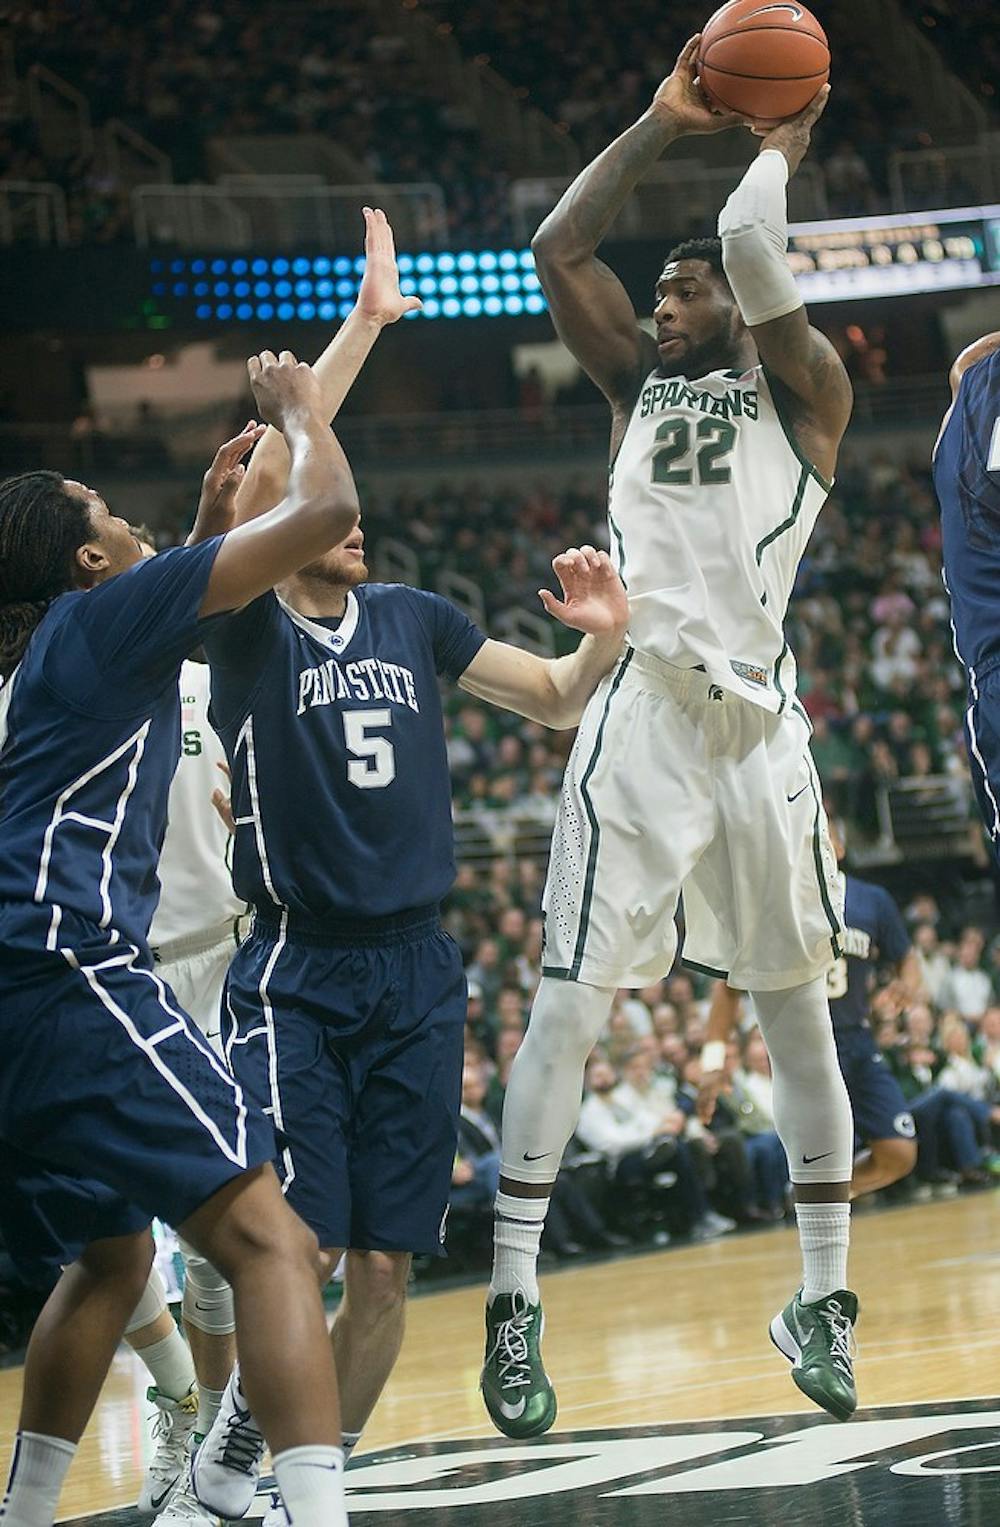 <p>Senior forward Branden Dawson attempts to score two points for the Spartans during the game against Penn State on Jan. 21, 2015 at the Breslin Center. The Spartans defeated the Nittany Lions by 66-60 Wednesday night. Emily Nagle/The State News</p>